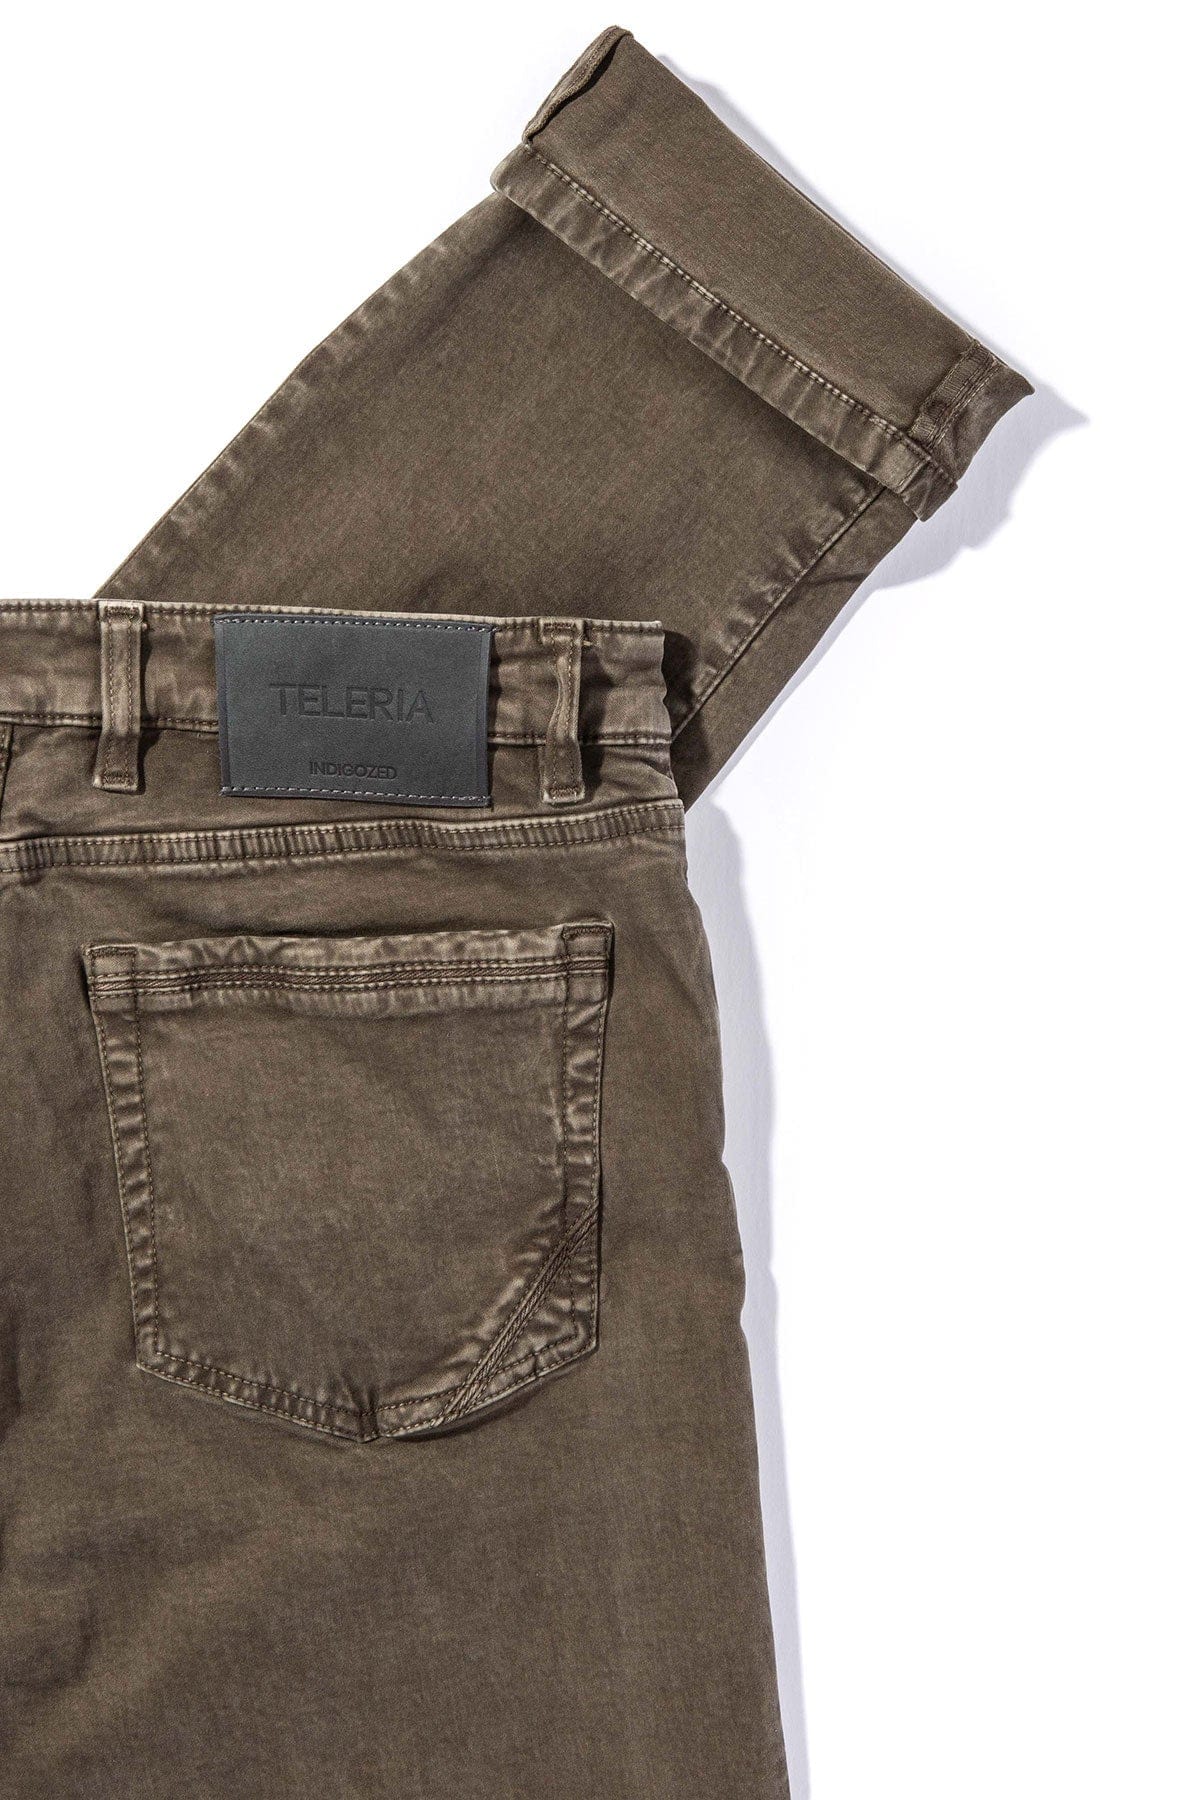 Teleria Zed Ryland Rugged Soft Touch Cotton Jeans in Army